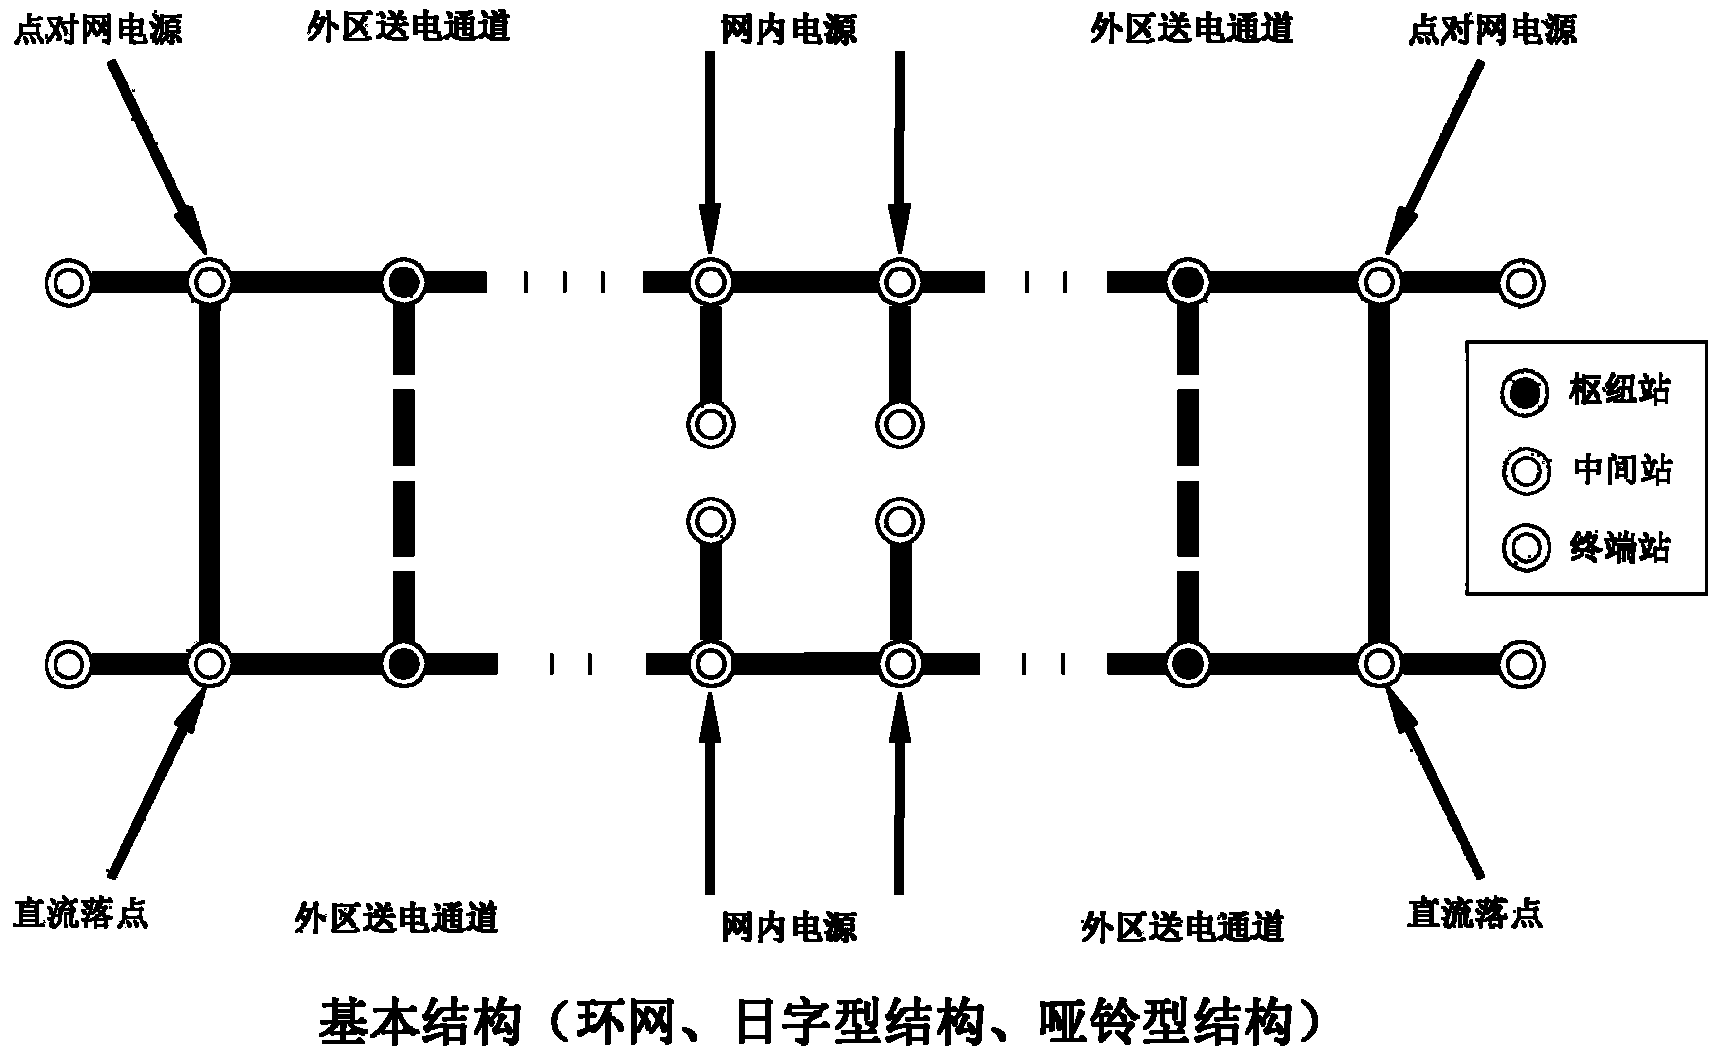 Power grid planning method based on three-dimensional grid structure grid construction mode